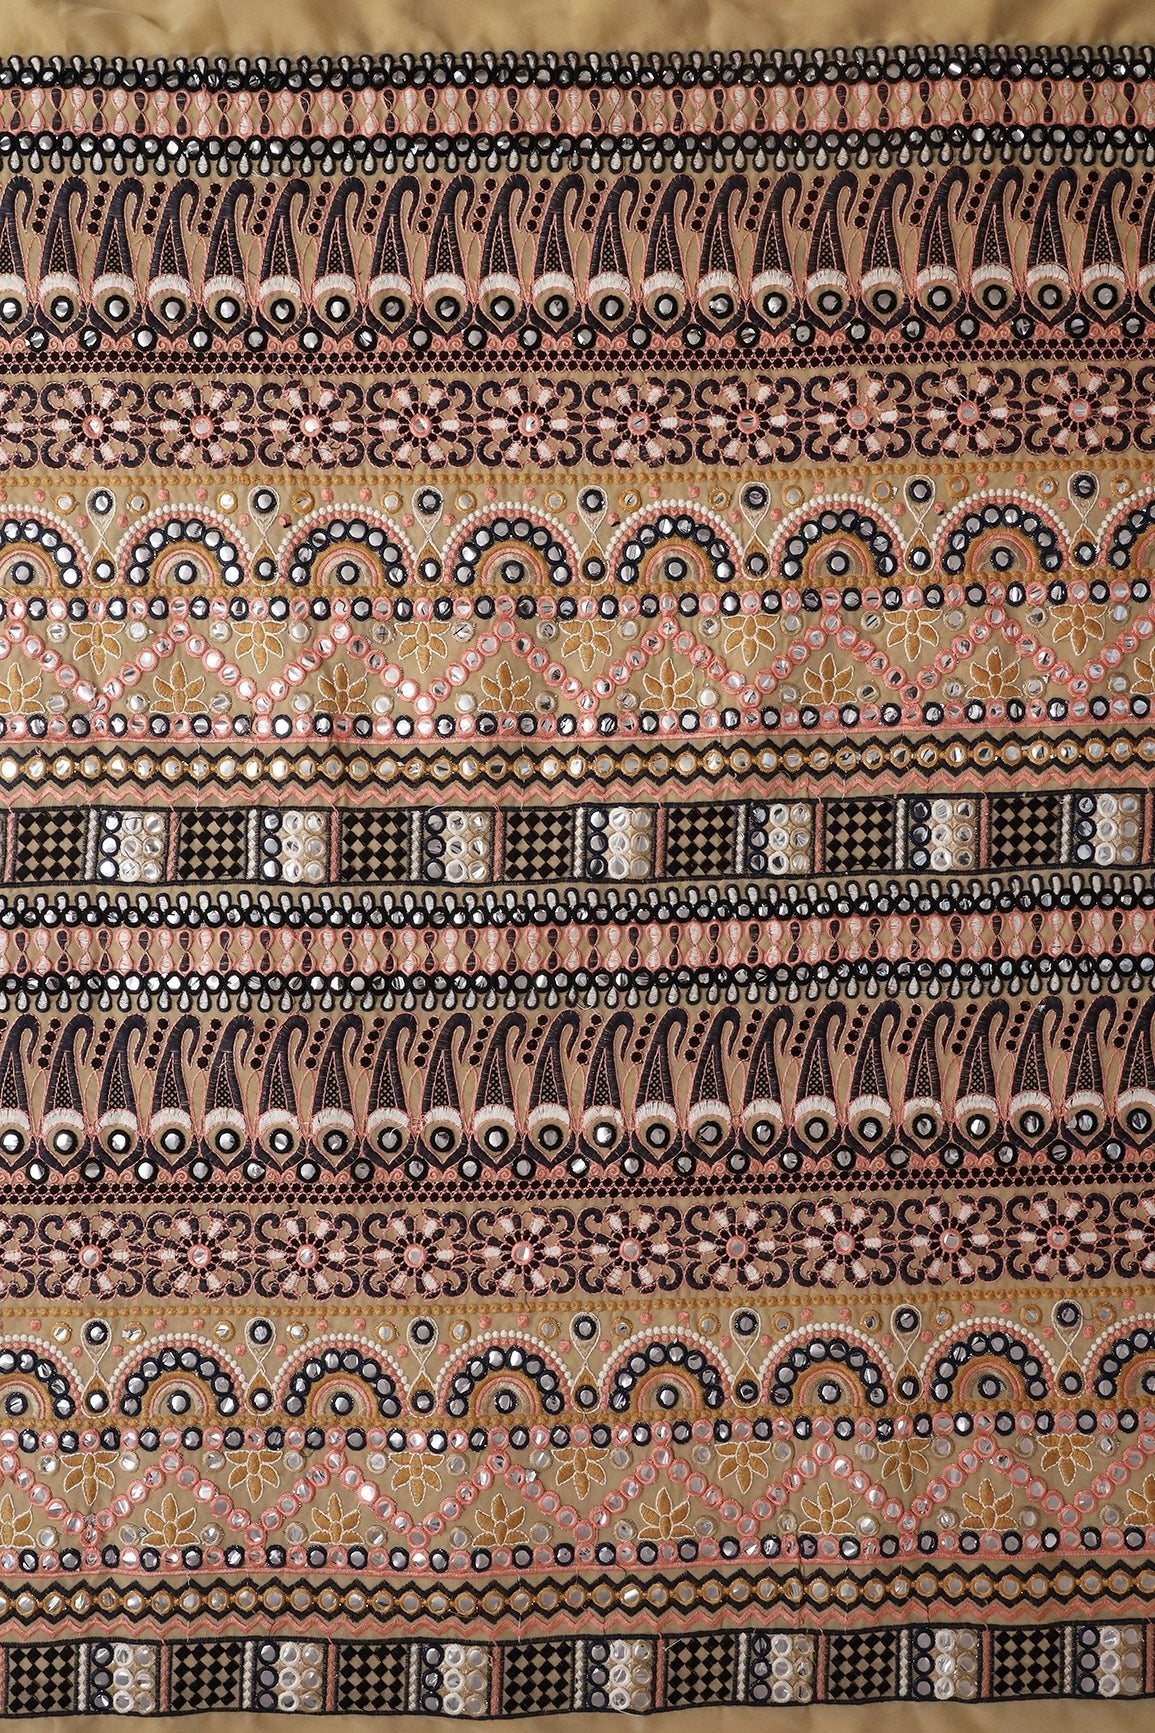 5 Meter Cut Piece Of Black And Beige Thread With Faux Mirror Gamthi Embroidery Work On Beige Georgette Fabric - doeraa